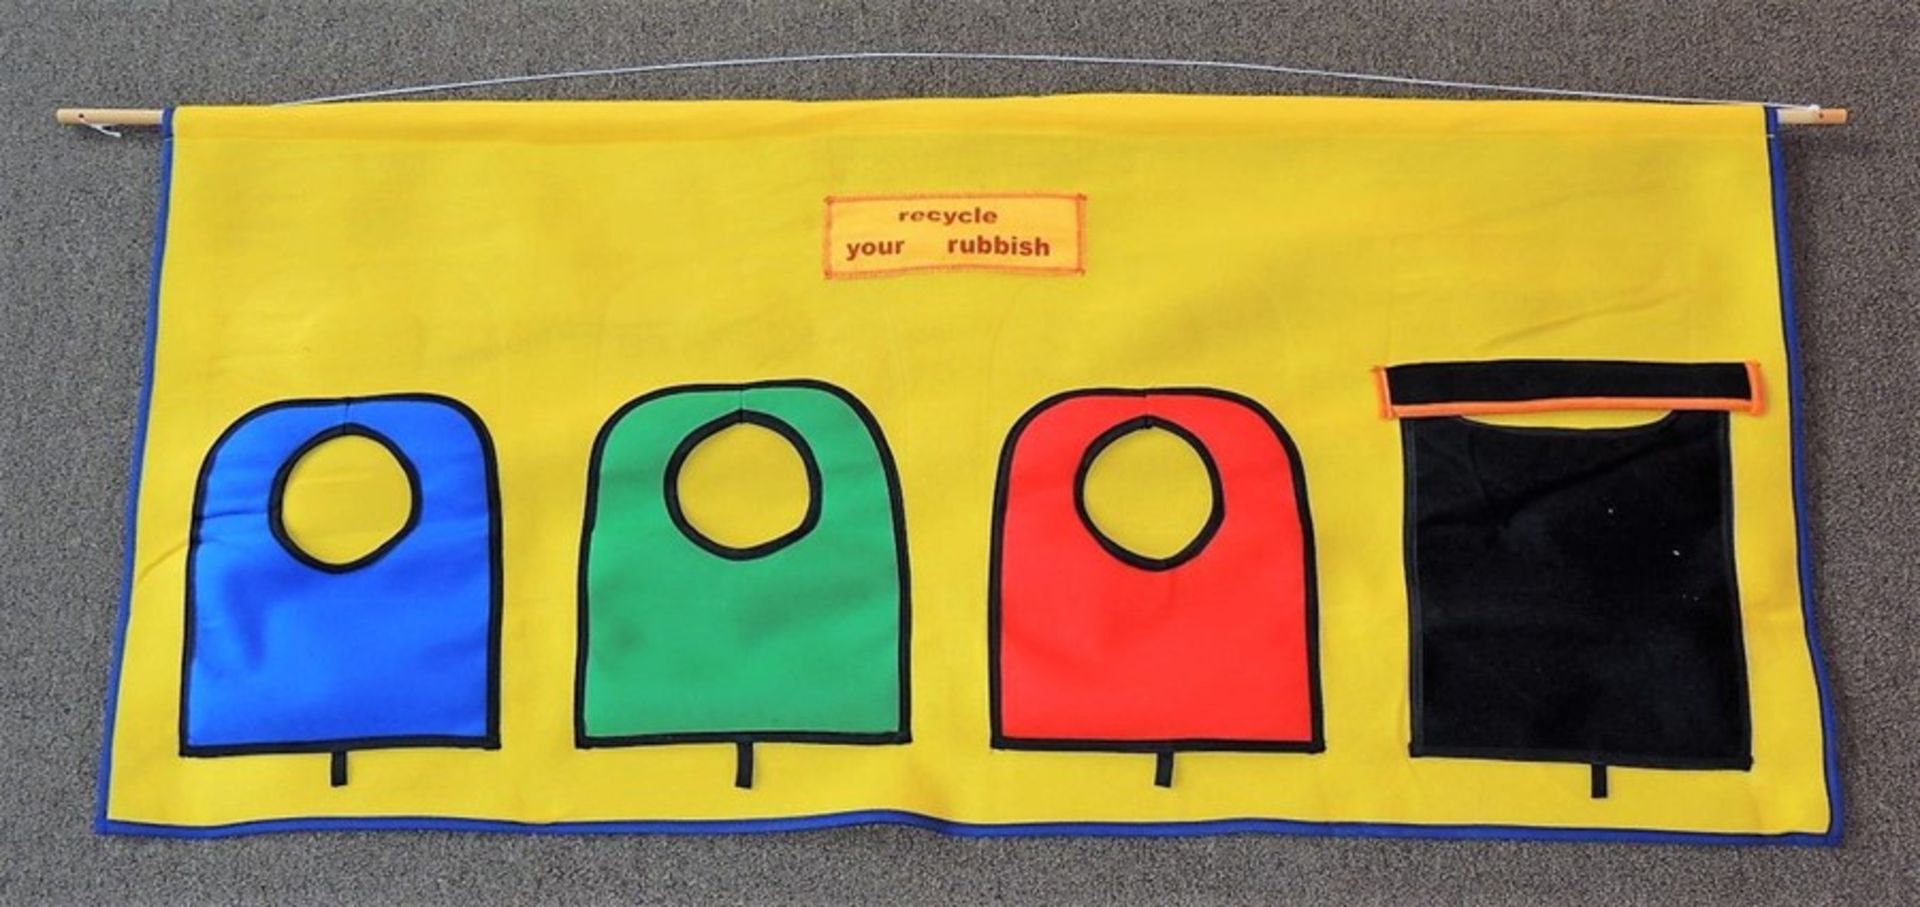 1 PACKAGED RECYCLING WALL CHARTLARGE FABRIC CLASSROOM WALL HANGER / RRP £15.00 (VIEWING HIGHLY